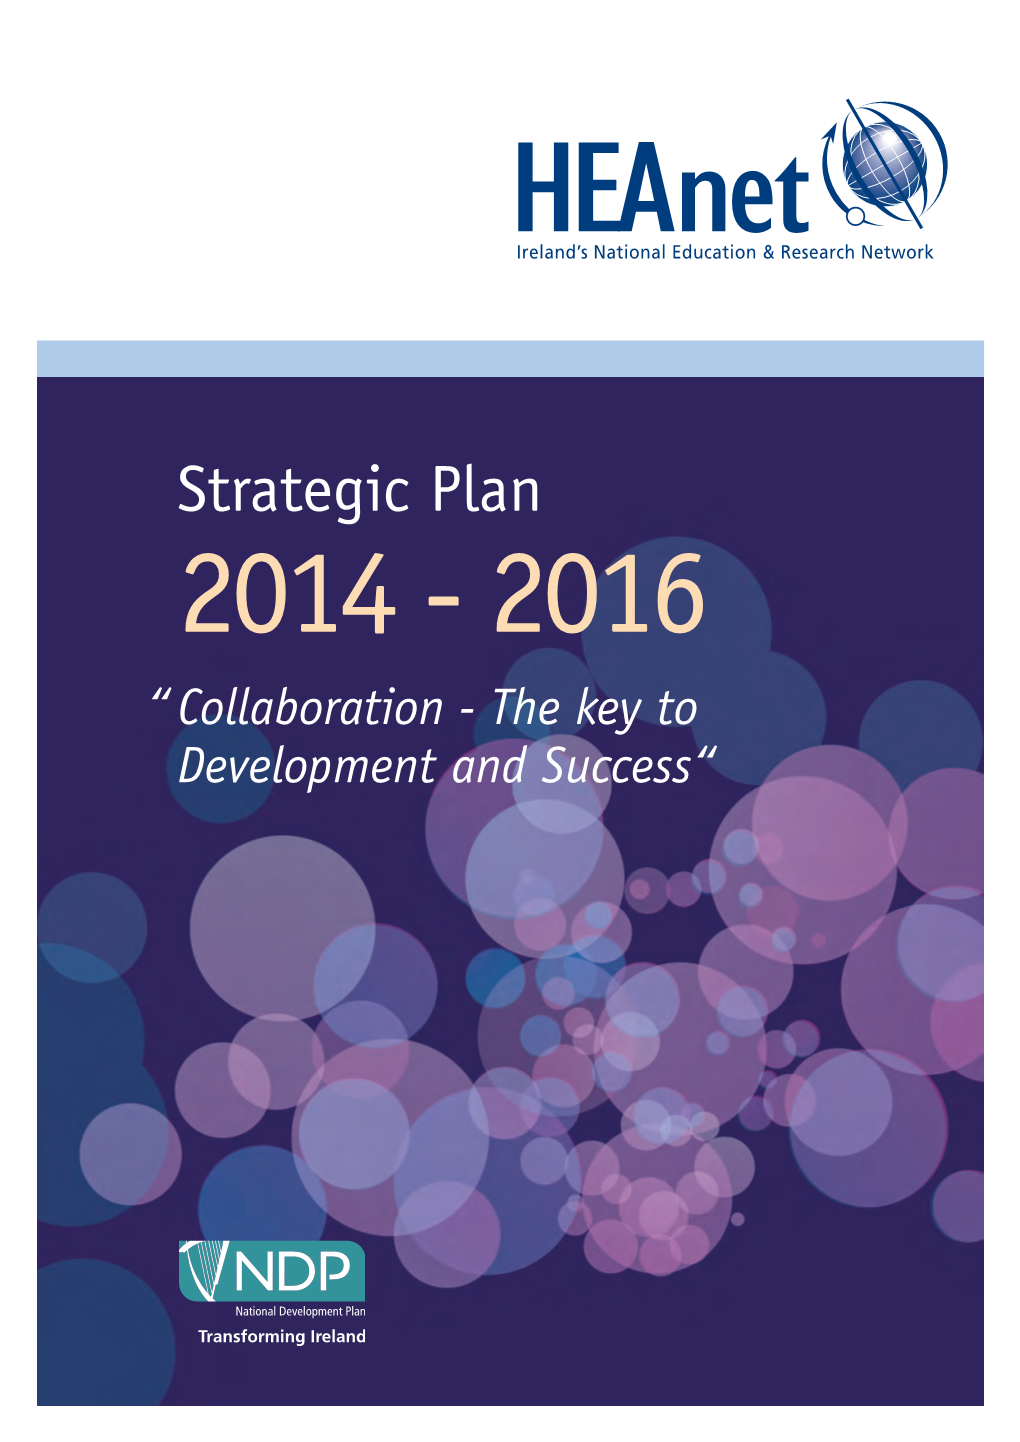 Strategic Plan 2014 - 2016 “ Collaboration - the Key to Development and Success“